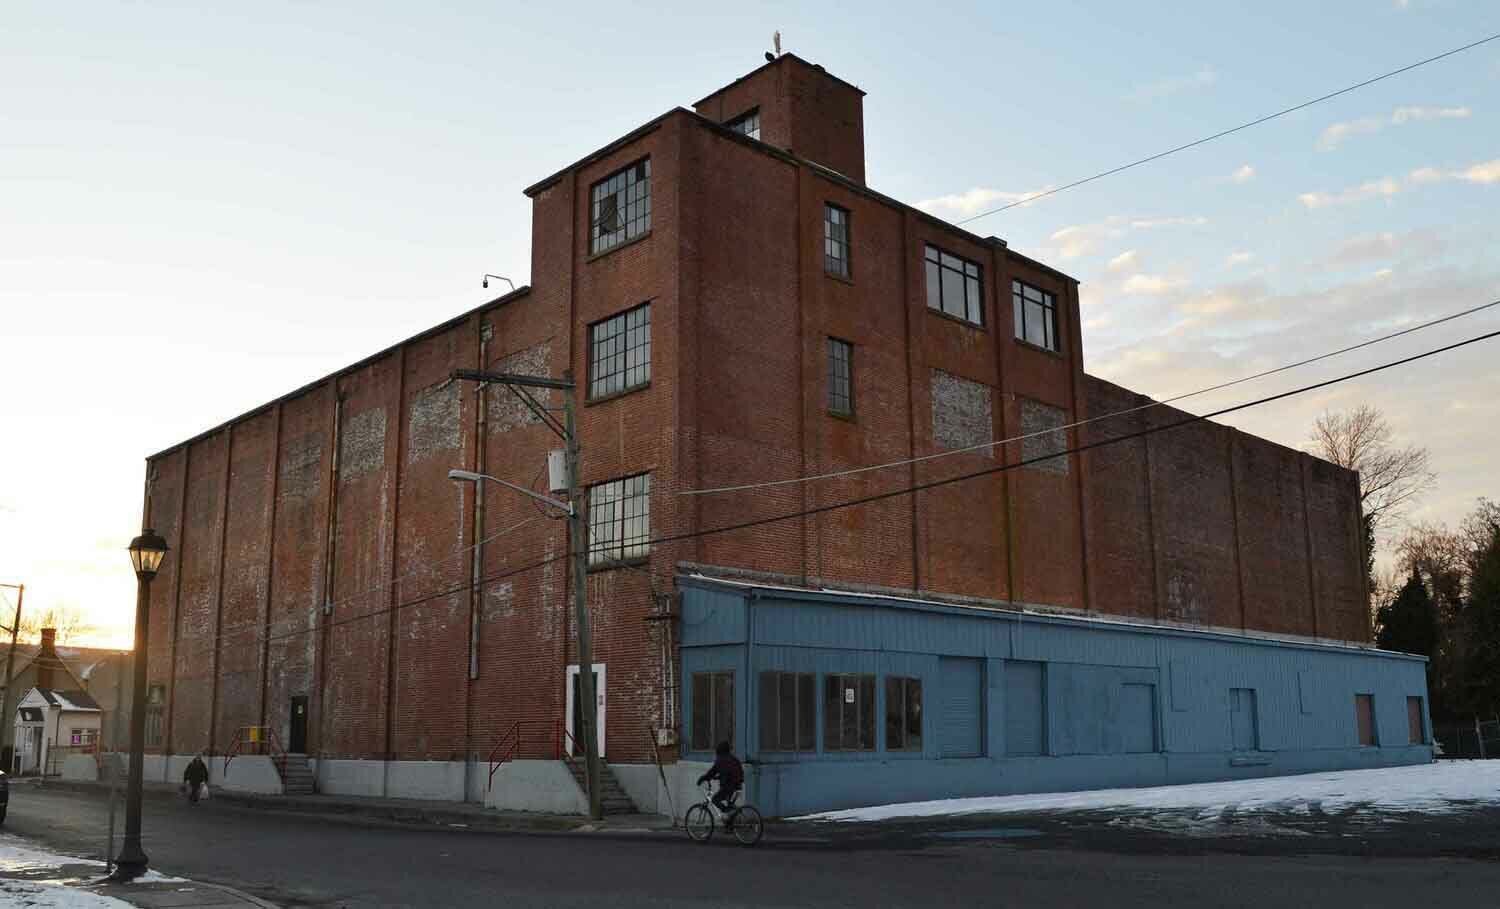 The former cold-storage facility on Depot Street in Georgetown, commonly known as the "icehouse," is the focus of development that could bring 25 upper-floor apartments for workforce housing.